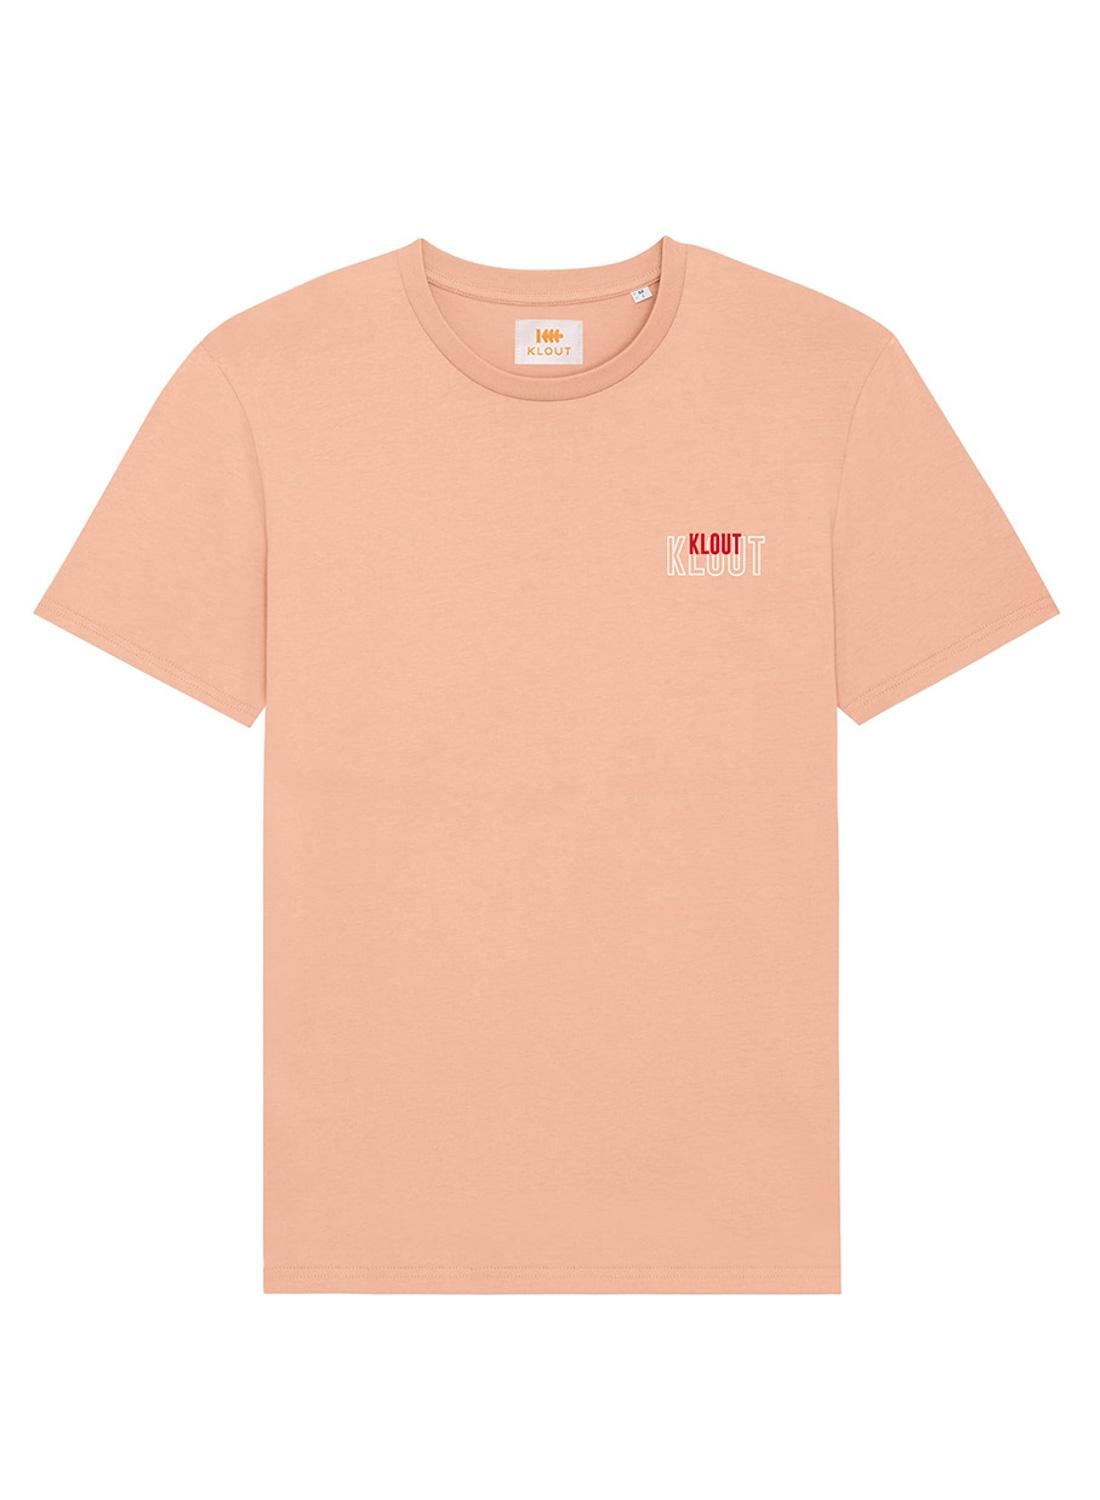 T-Shirt Klout Graphic Rosa Salmone